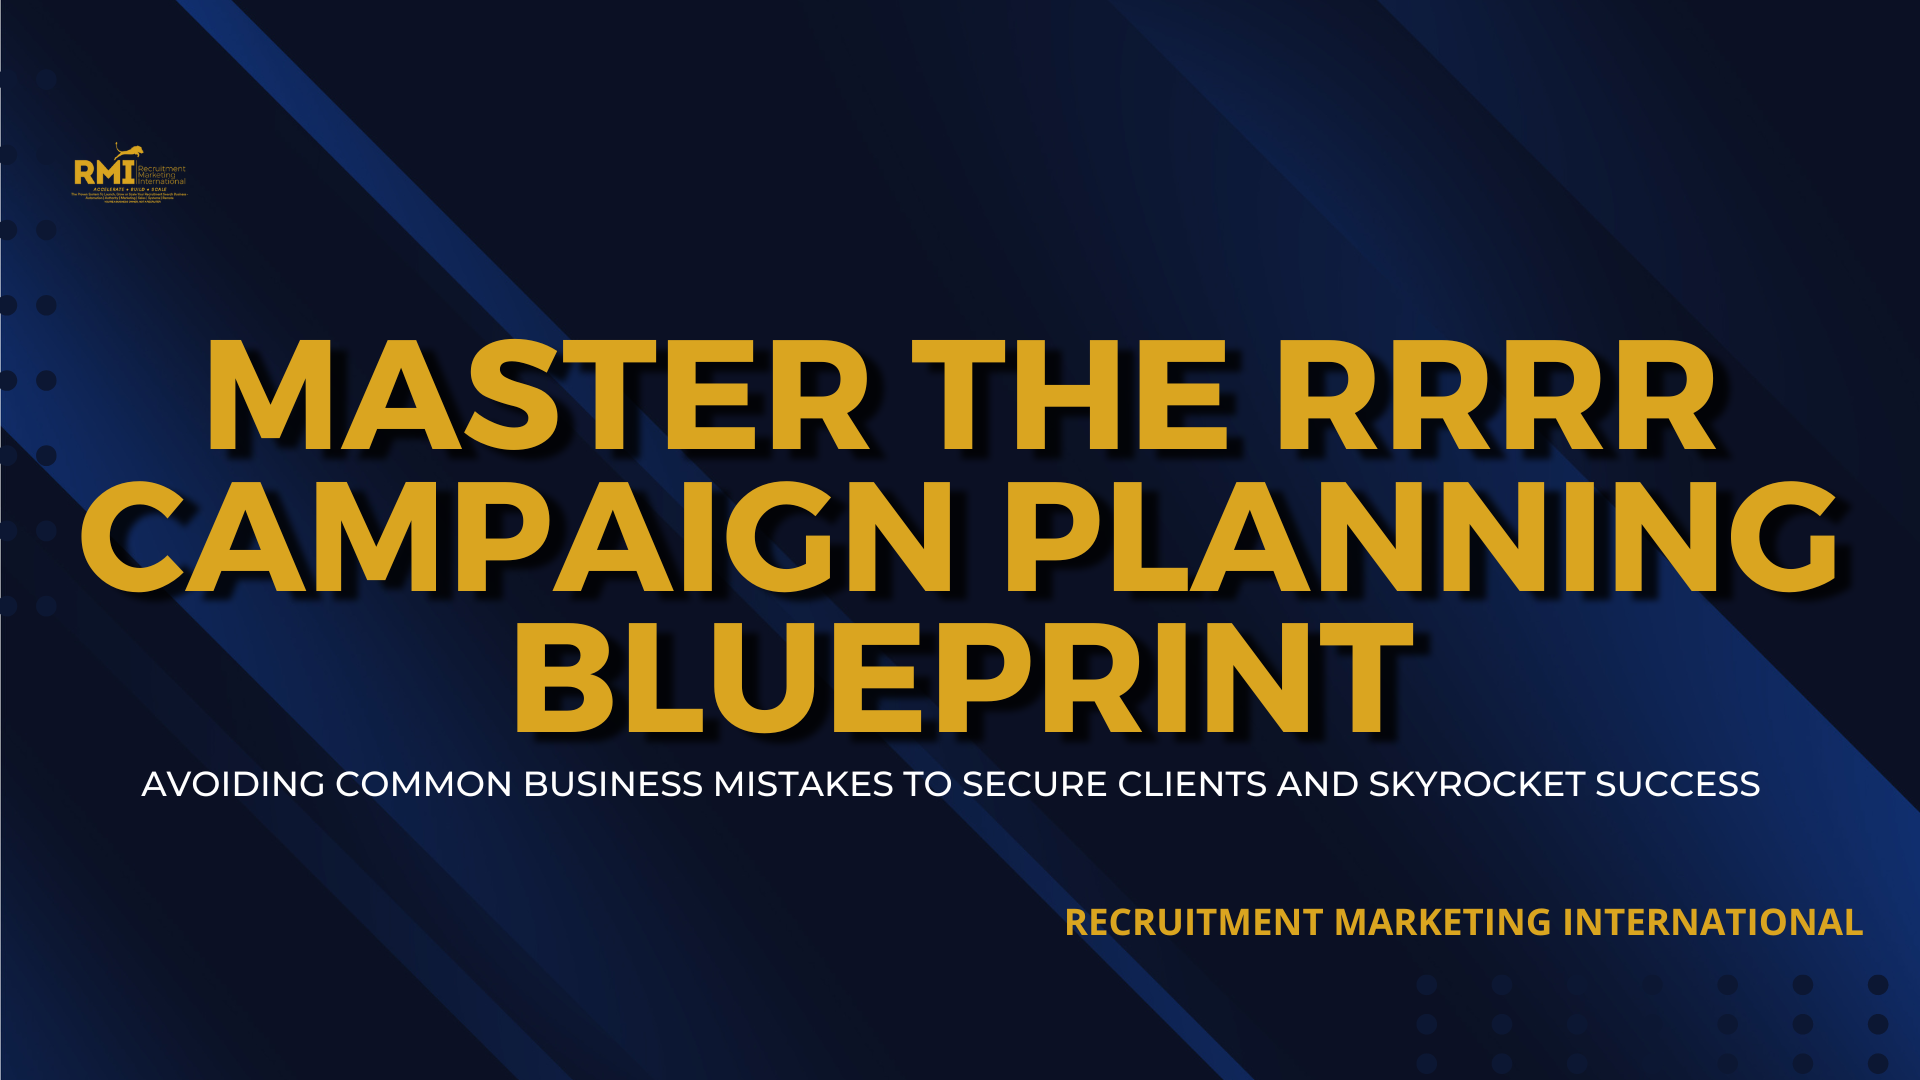 PODCAST 231 – MASTER THE RRRR CAMPAIGN PLANNING BLUEPRINT: AVOIDING COMMON BUSINESS MISTAKES TO SECURE CLIENTS AND SKYROCKET SUCCESS